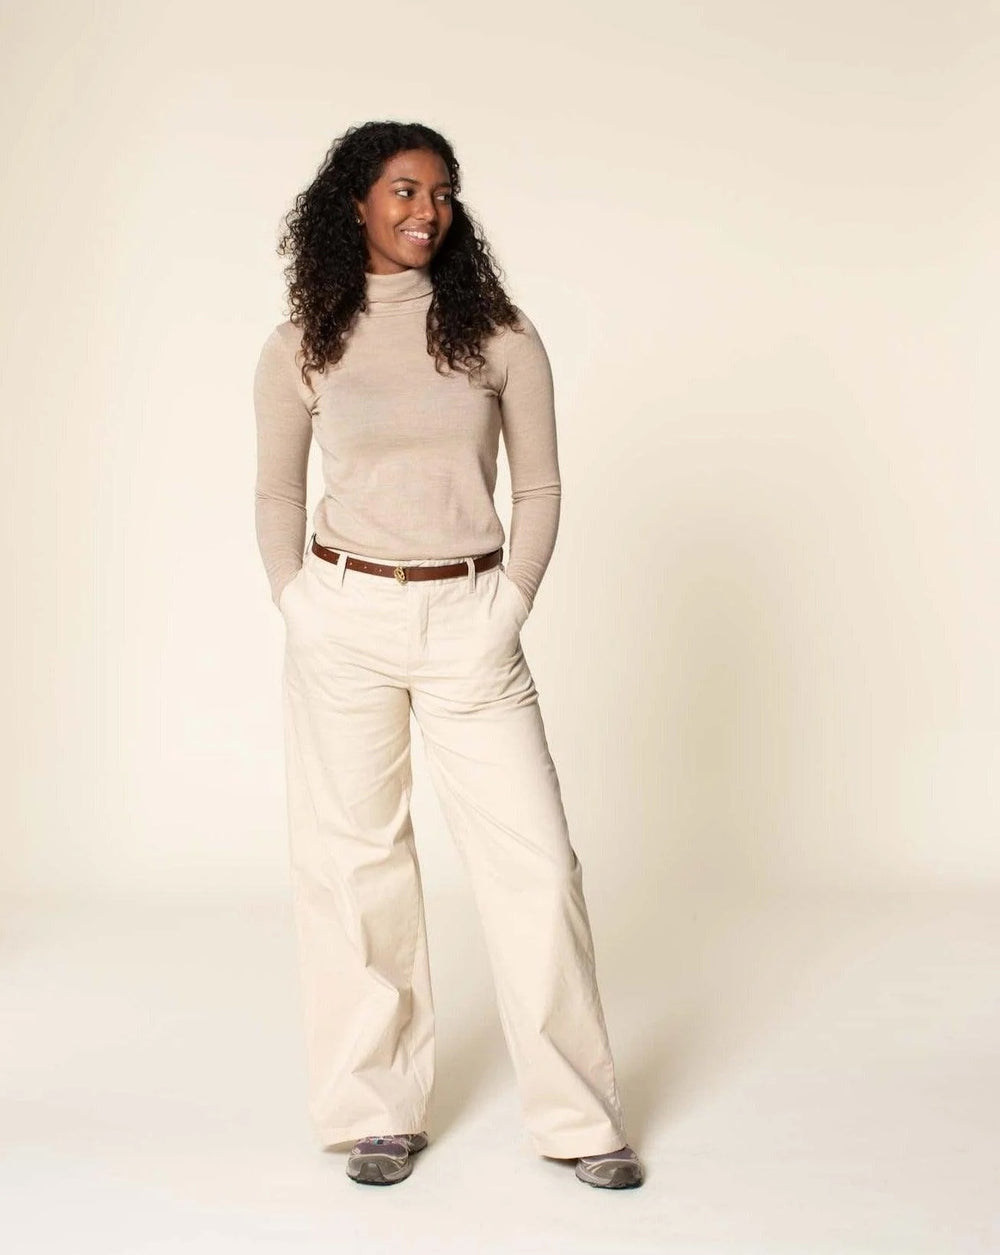 Woman wearing the Hepburn Pants sewing pattern from Wardrobe by Me on The Fold Line. A trouser pattern made in cotton, linen, canvas or denim fabrics, featuring a front zip fly, side pockets, back welt pockets, waistband with five belt loops and wide legs